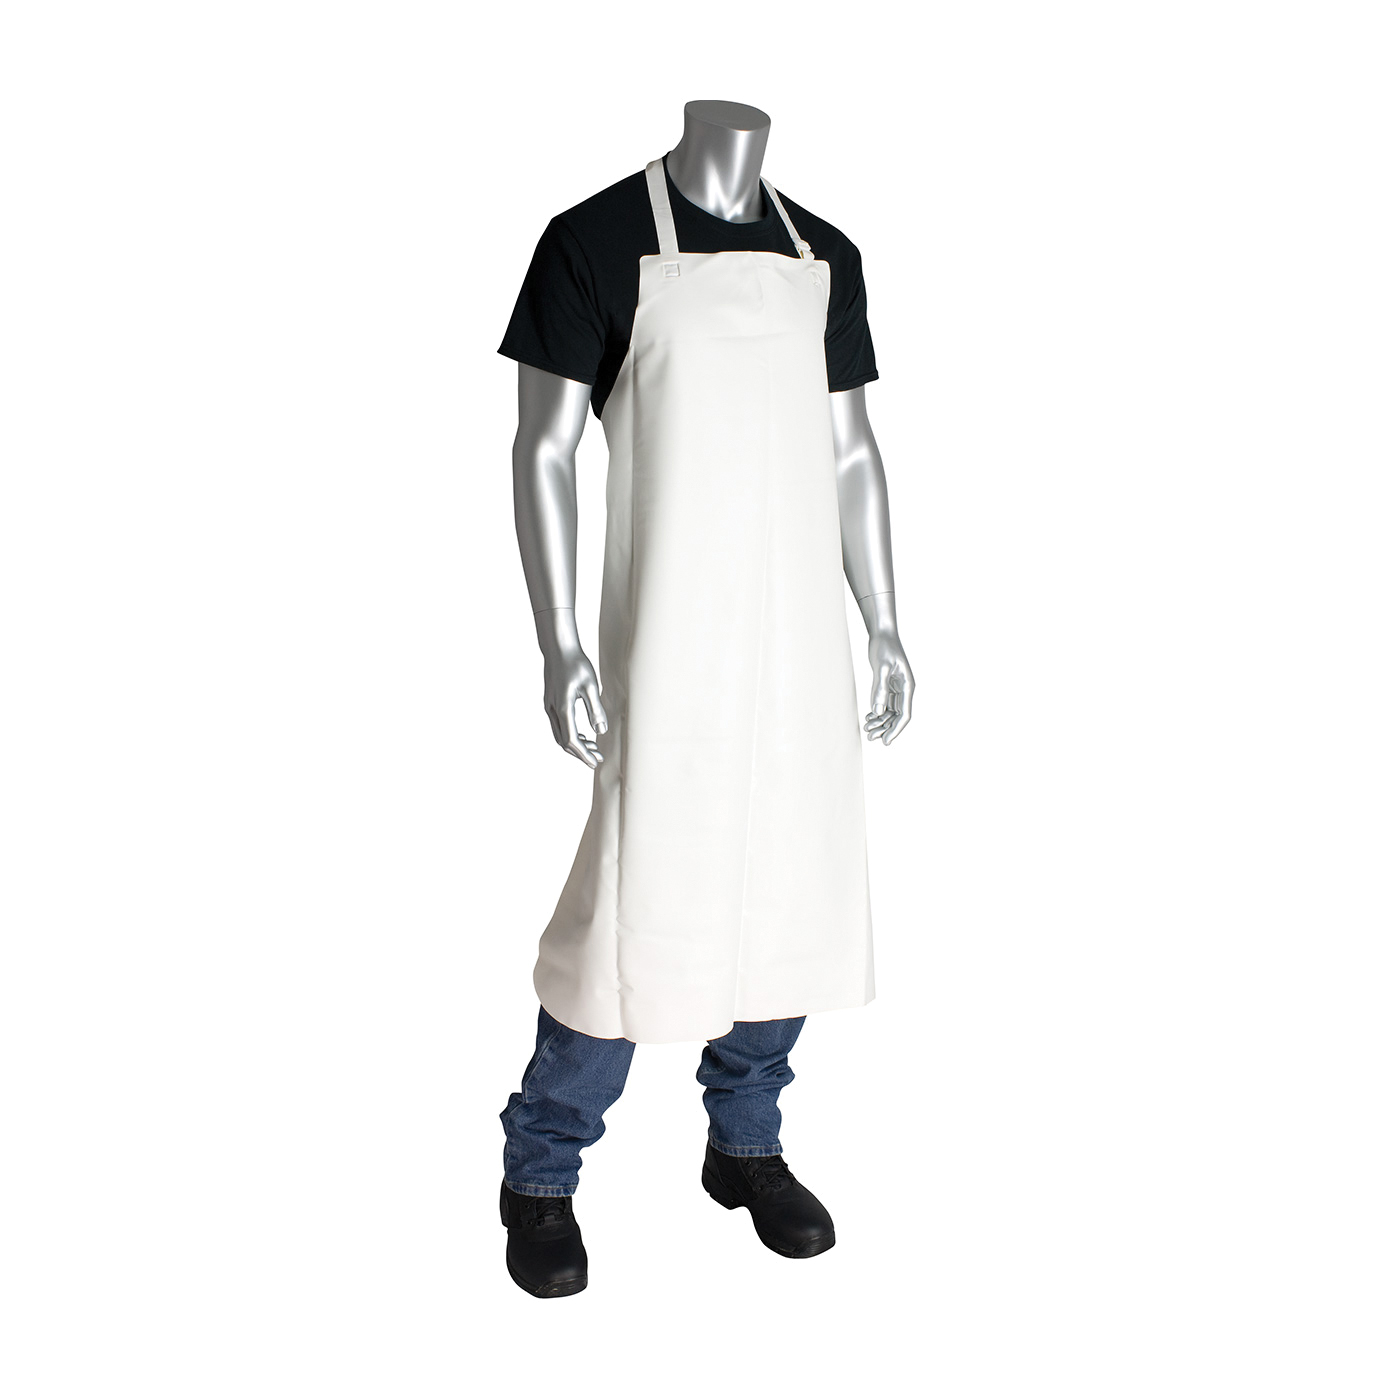 PIP® 200-20001 Heavy Duty Bib Apron, PVC/Vinyl, 44 in L x 33 in W, Resists: Chemical, Fats, Oil and Grease